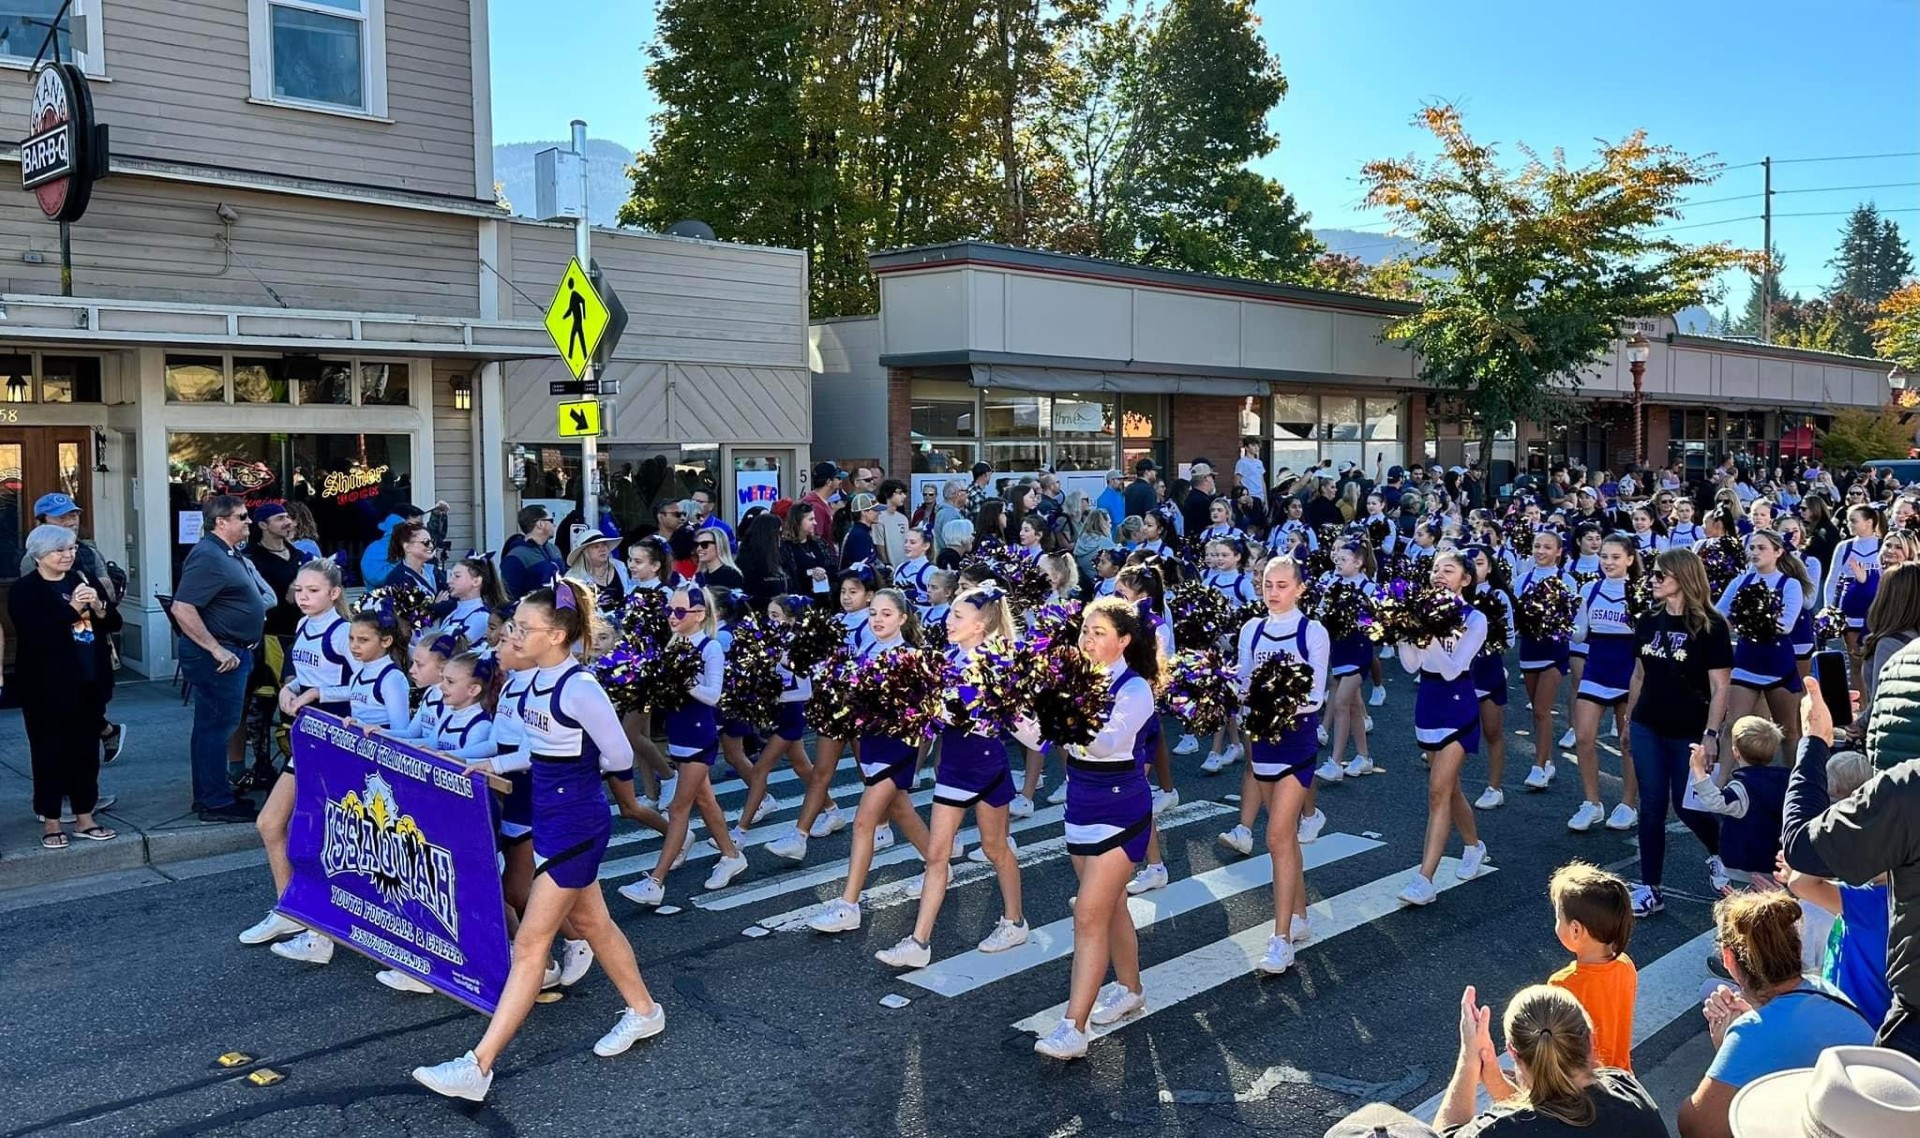 Issaquah Salmon Days Festival Parade - Photo by Tiger Mountain Photo